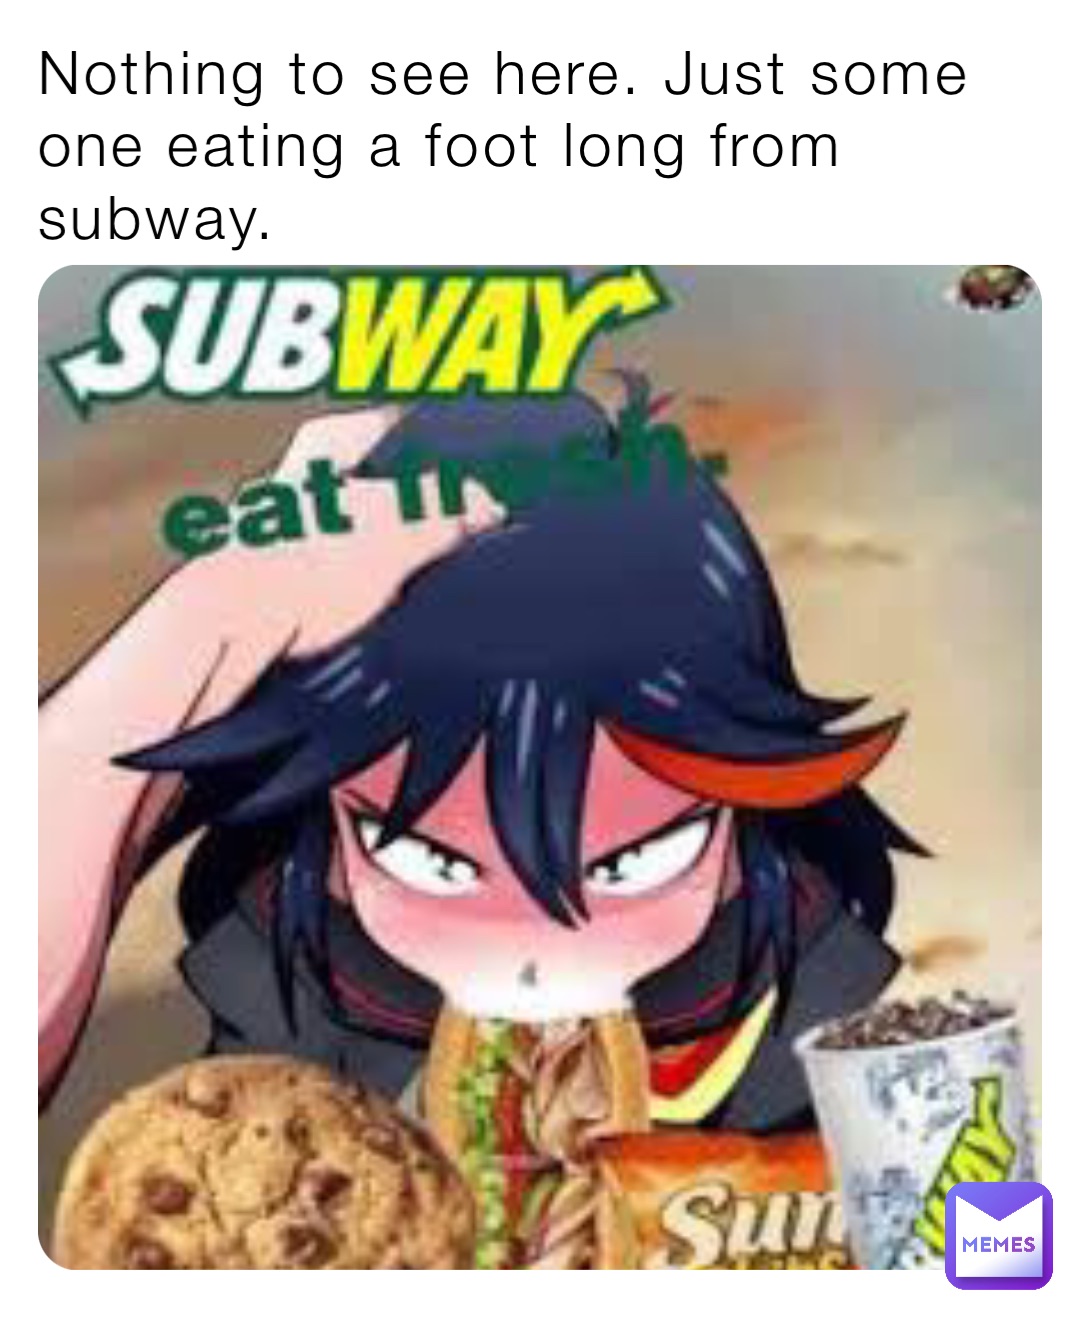 Nothing to see here. Just some one eating a foot long from subway.